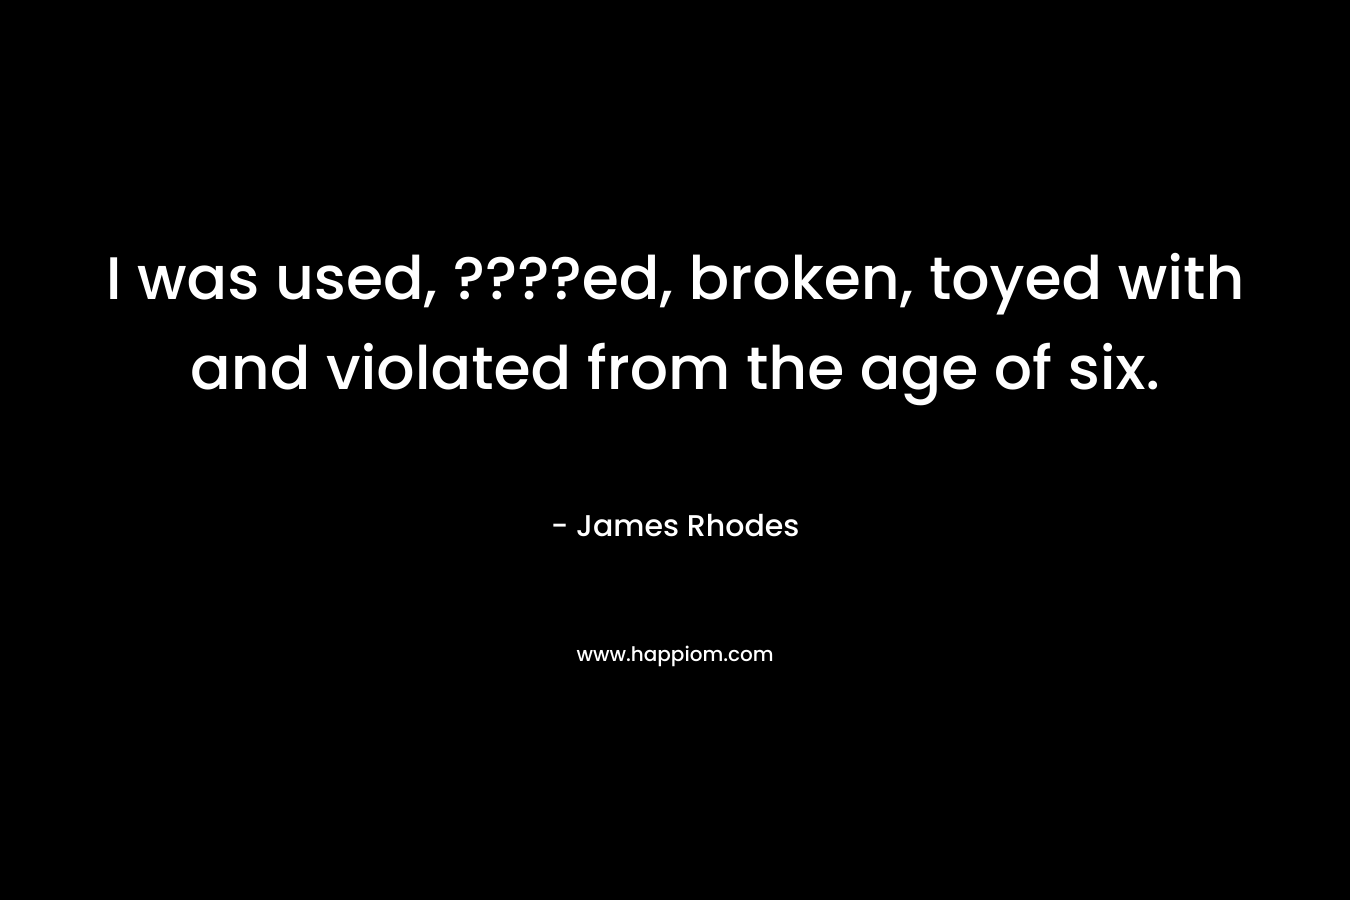 I was used, ????ed, broken, toyed with and violated from the age of six. – James Rhodes